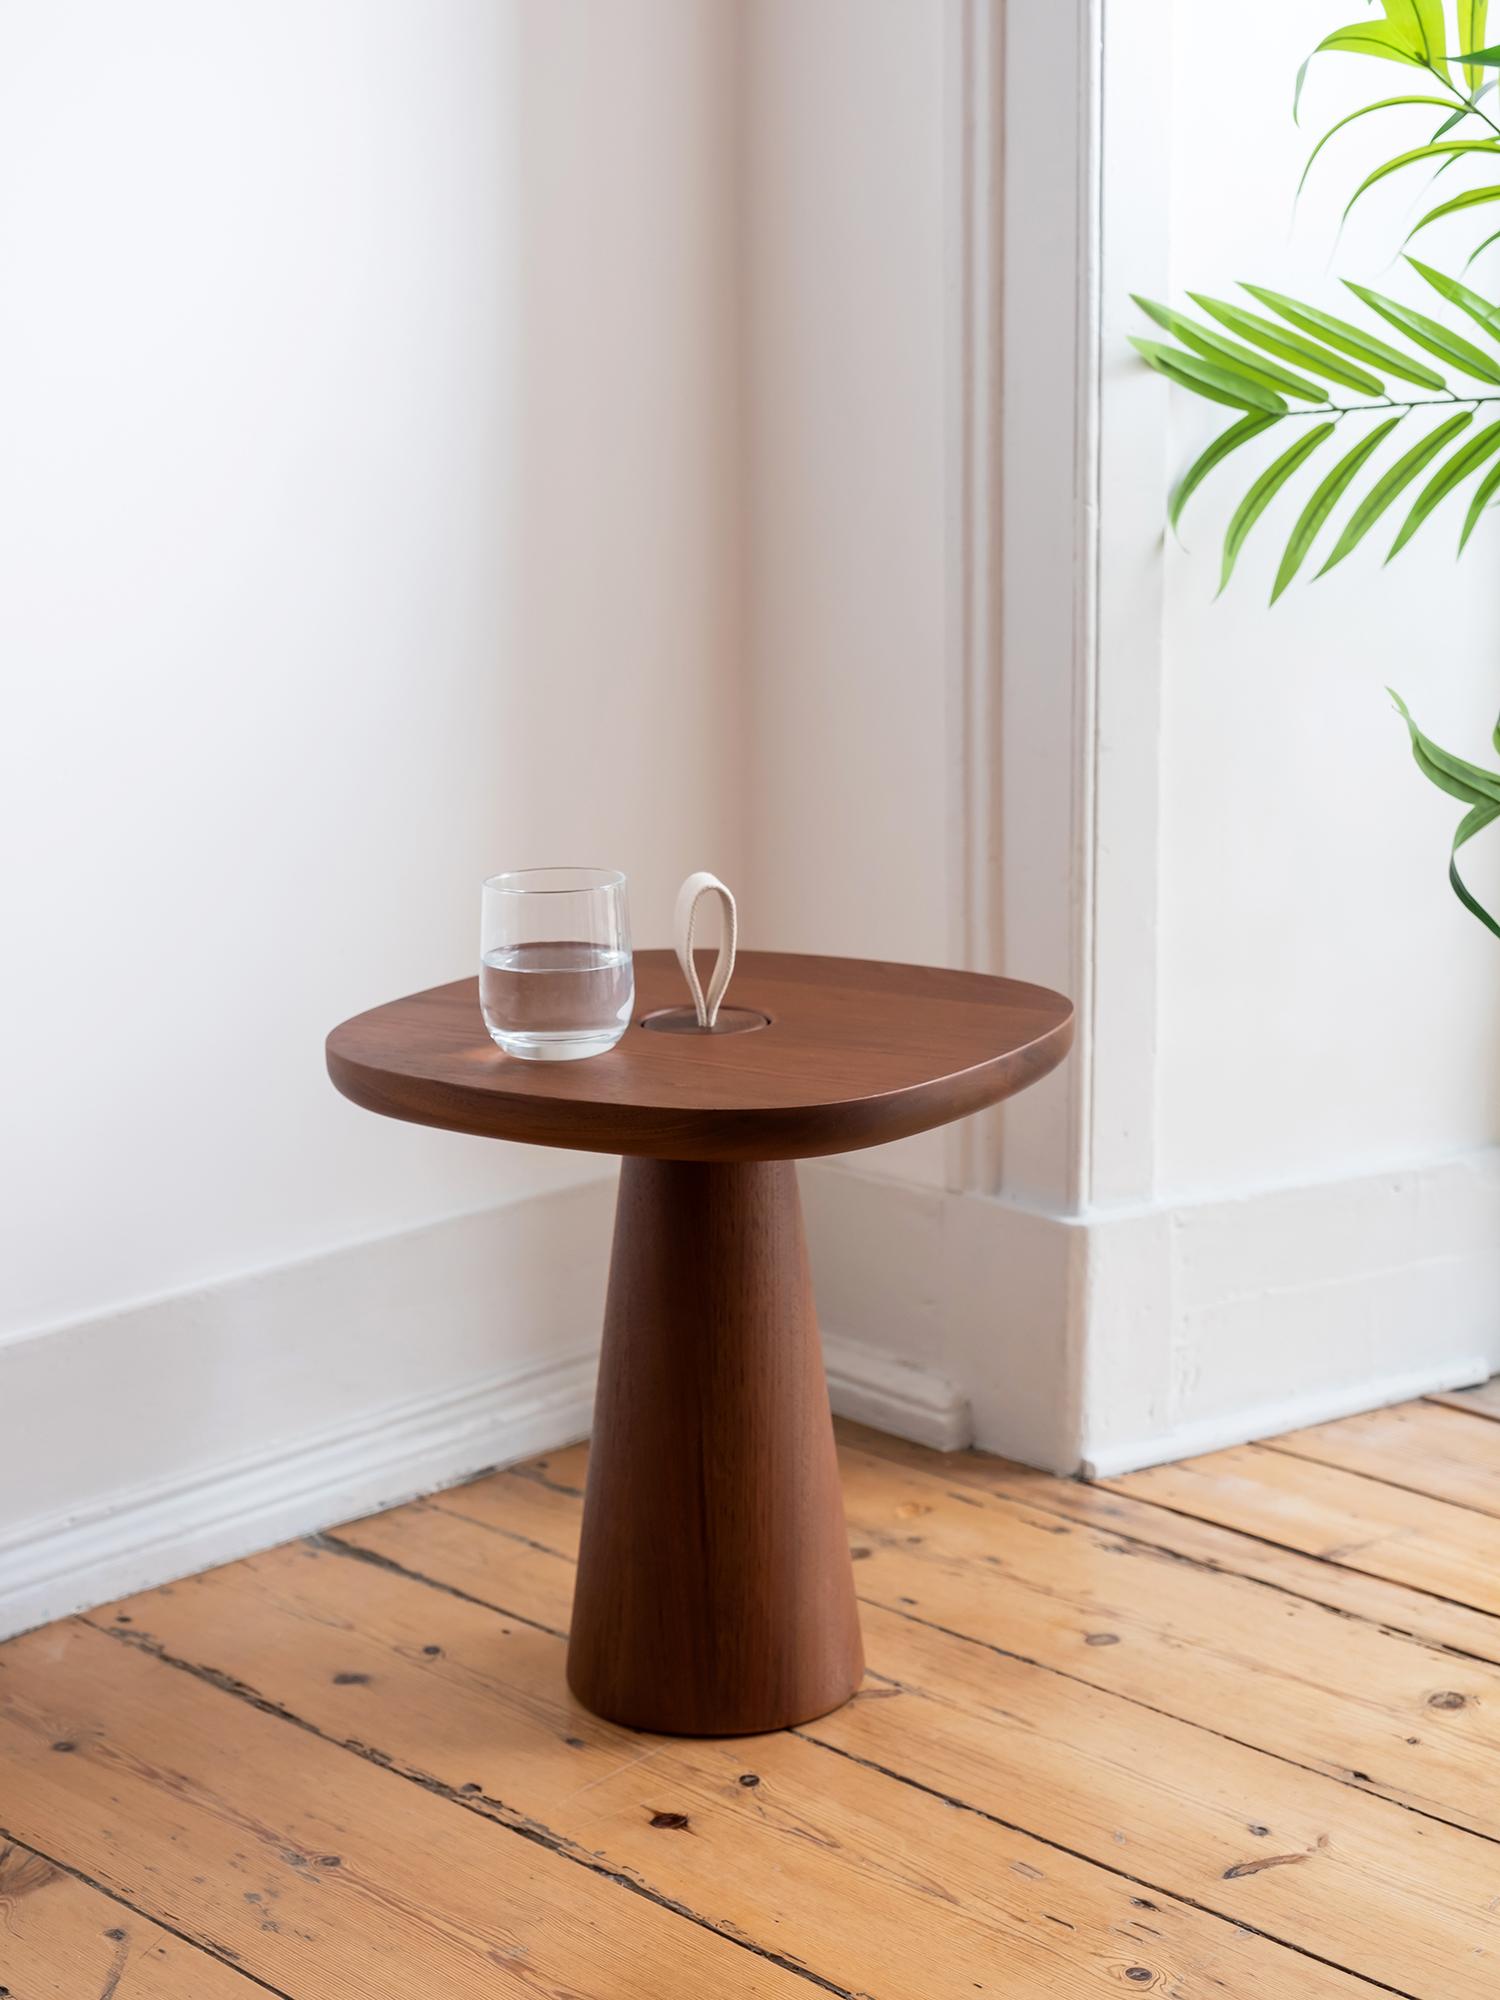 Minimal in its components, MIGO table consists of two parts: a table top, and a conical shaped base, whose top ends with a strap for it to be lifted by.

The soft and friendly shape of the top makes the table suitable for different situations, and